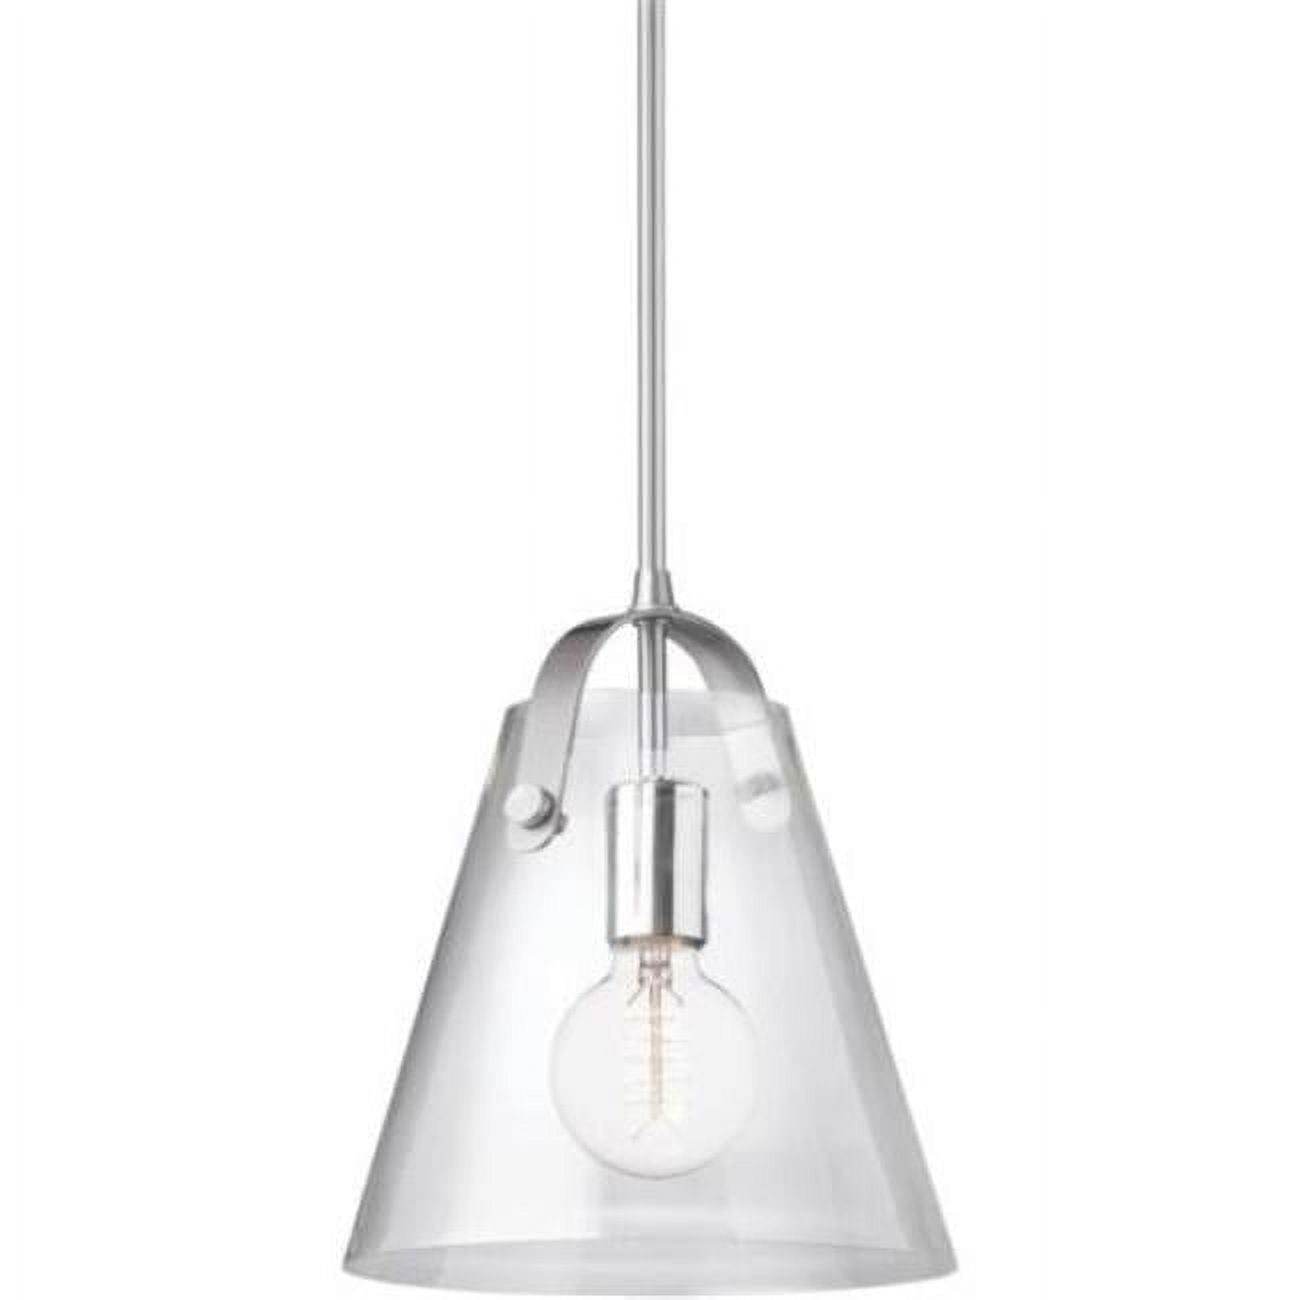 Picture of Dainolite 871-91P-PC Polly 1 Light Incandescent Pendant, Polished Chrome with Clear Glass